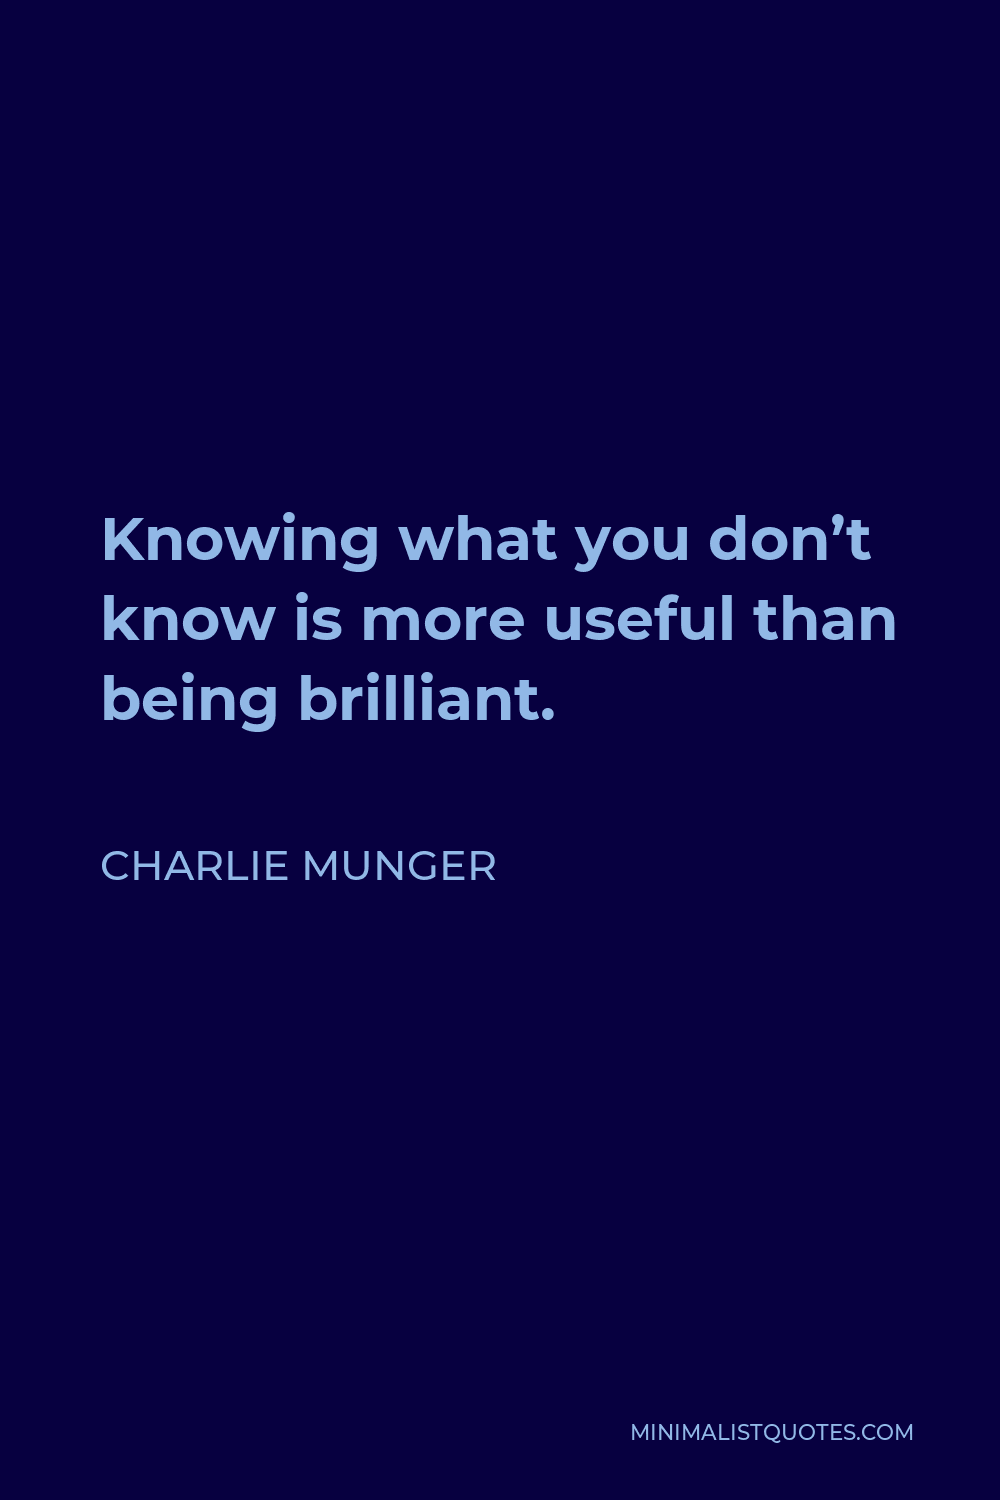 Charlie Munger Quote - Knowing what you don’t know is more useful than being brilliant.